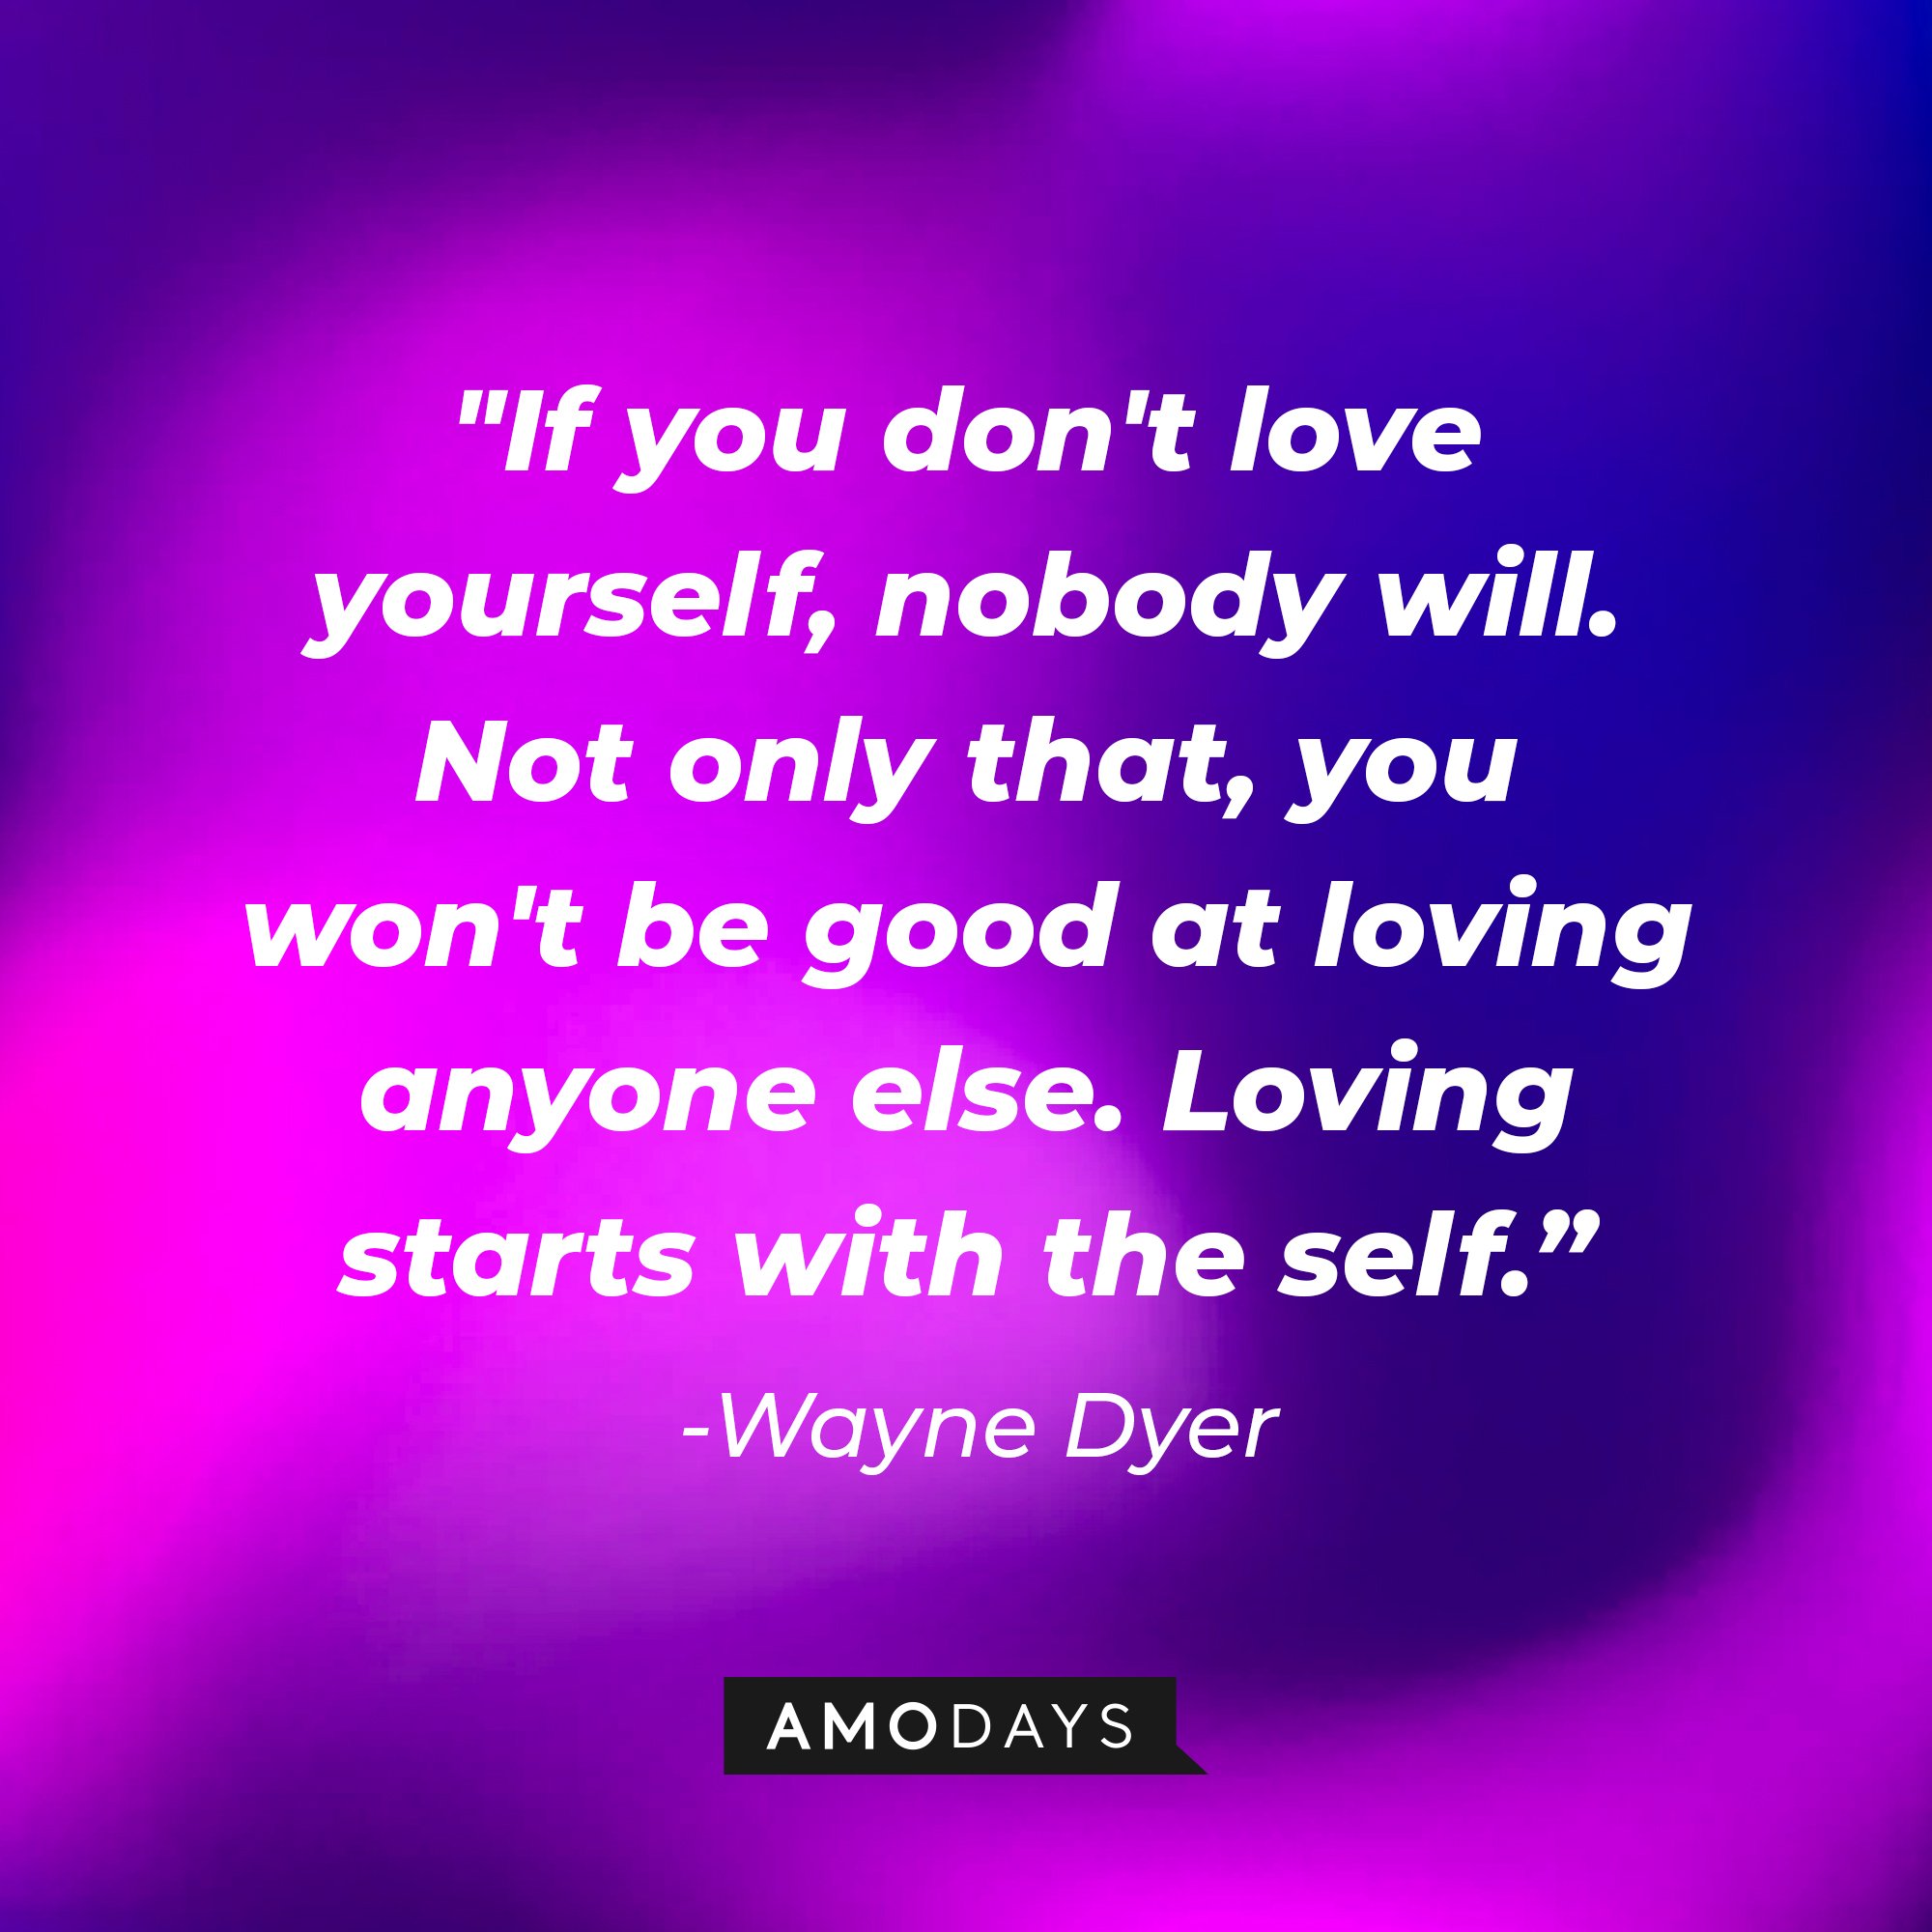 Wayne Dyer's quote: "If you don't love yourself, nobody will. Not only that, you won't be good at loving anyone else. Loving starts with the self." | Image: AmoDays